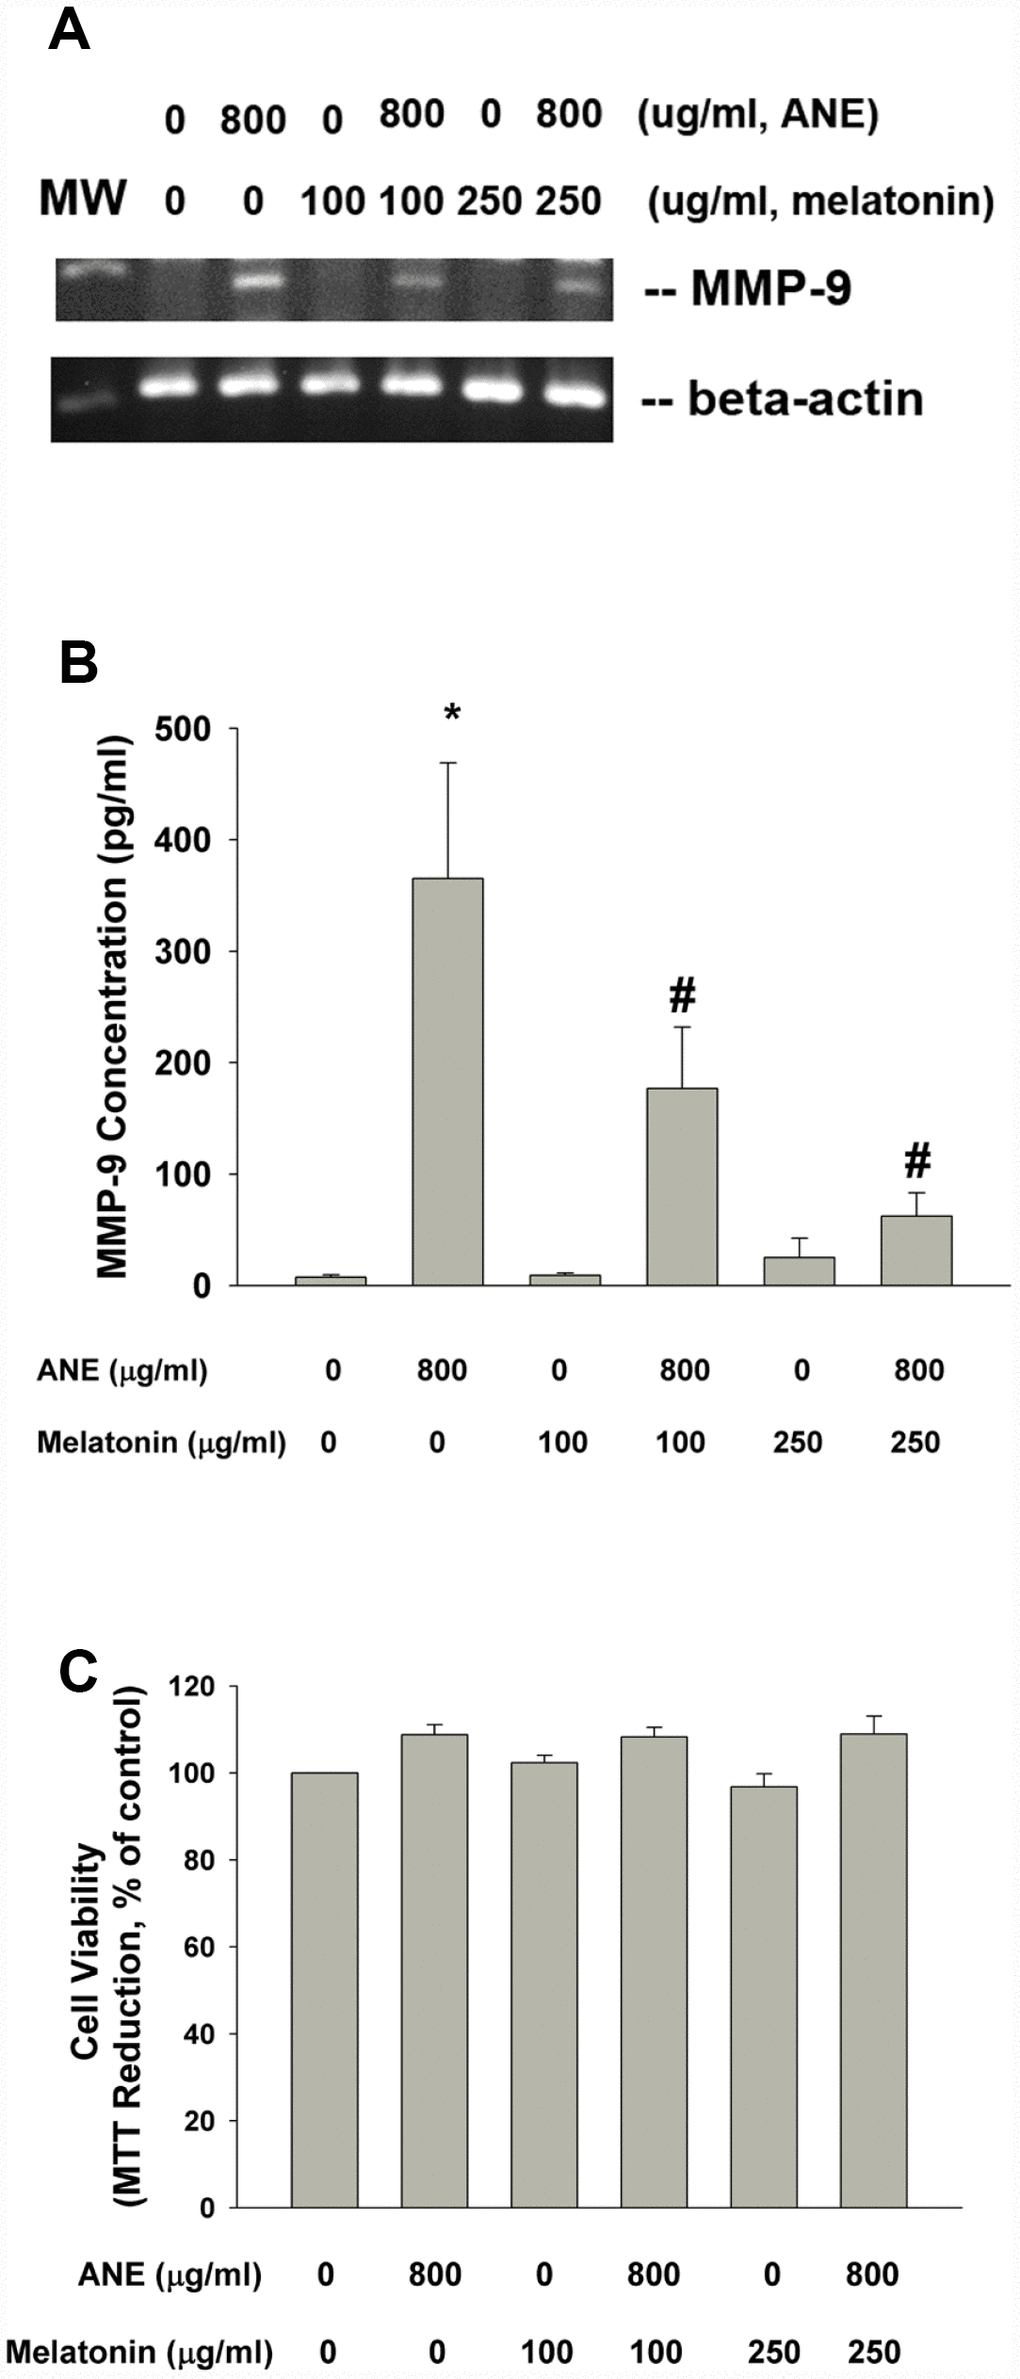 Effect of melatonin on ANE-induced MMP-9 expression and secretion. (A) Effect of melatonin (100 and 250 μg/ml) on ANE (800 μg/ml)-induced MMP-9 mRNA expression (one representative result was shown) and (B) Effect of melatonin on ANE-induced MMP-9 secretion in SAS oral cancer epithelial cells. Results were expressed as Mean ± SE (pg/ml). (C) Effect of melatonin on ANE-induced changes in cell viability of SAS cells (as % of control). *denotes statistically significant difference when compared with control. #denotes statistically significant difference when compared with ANE-treated group.